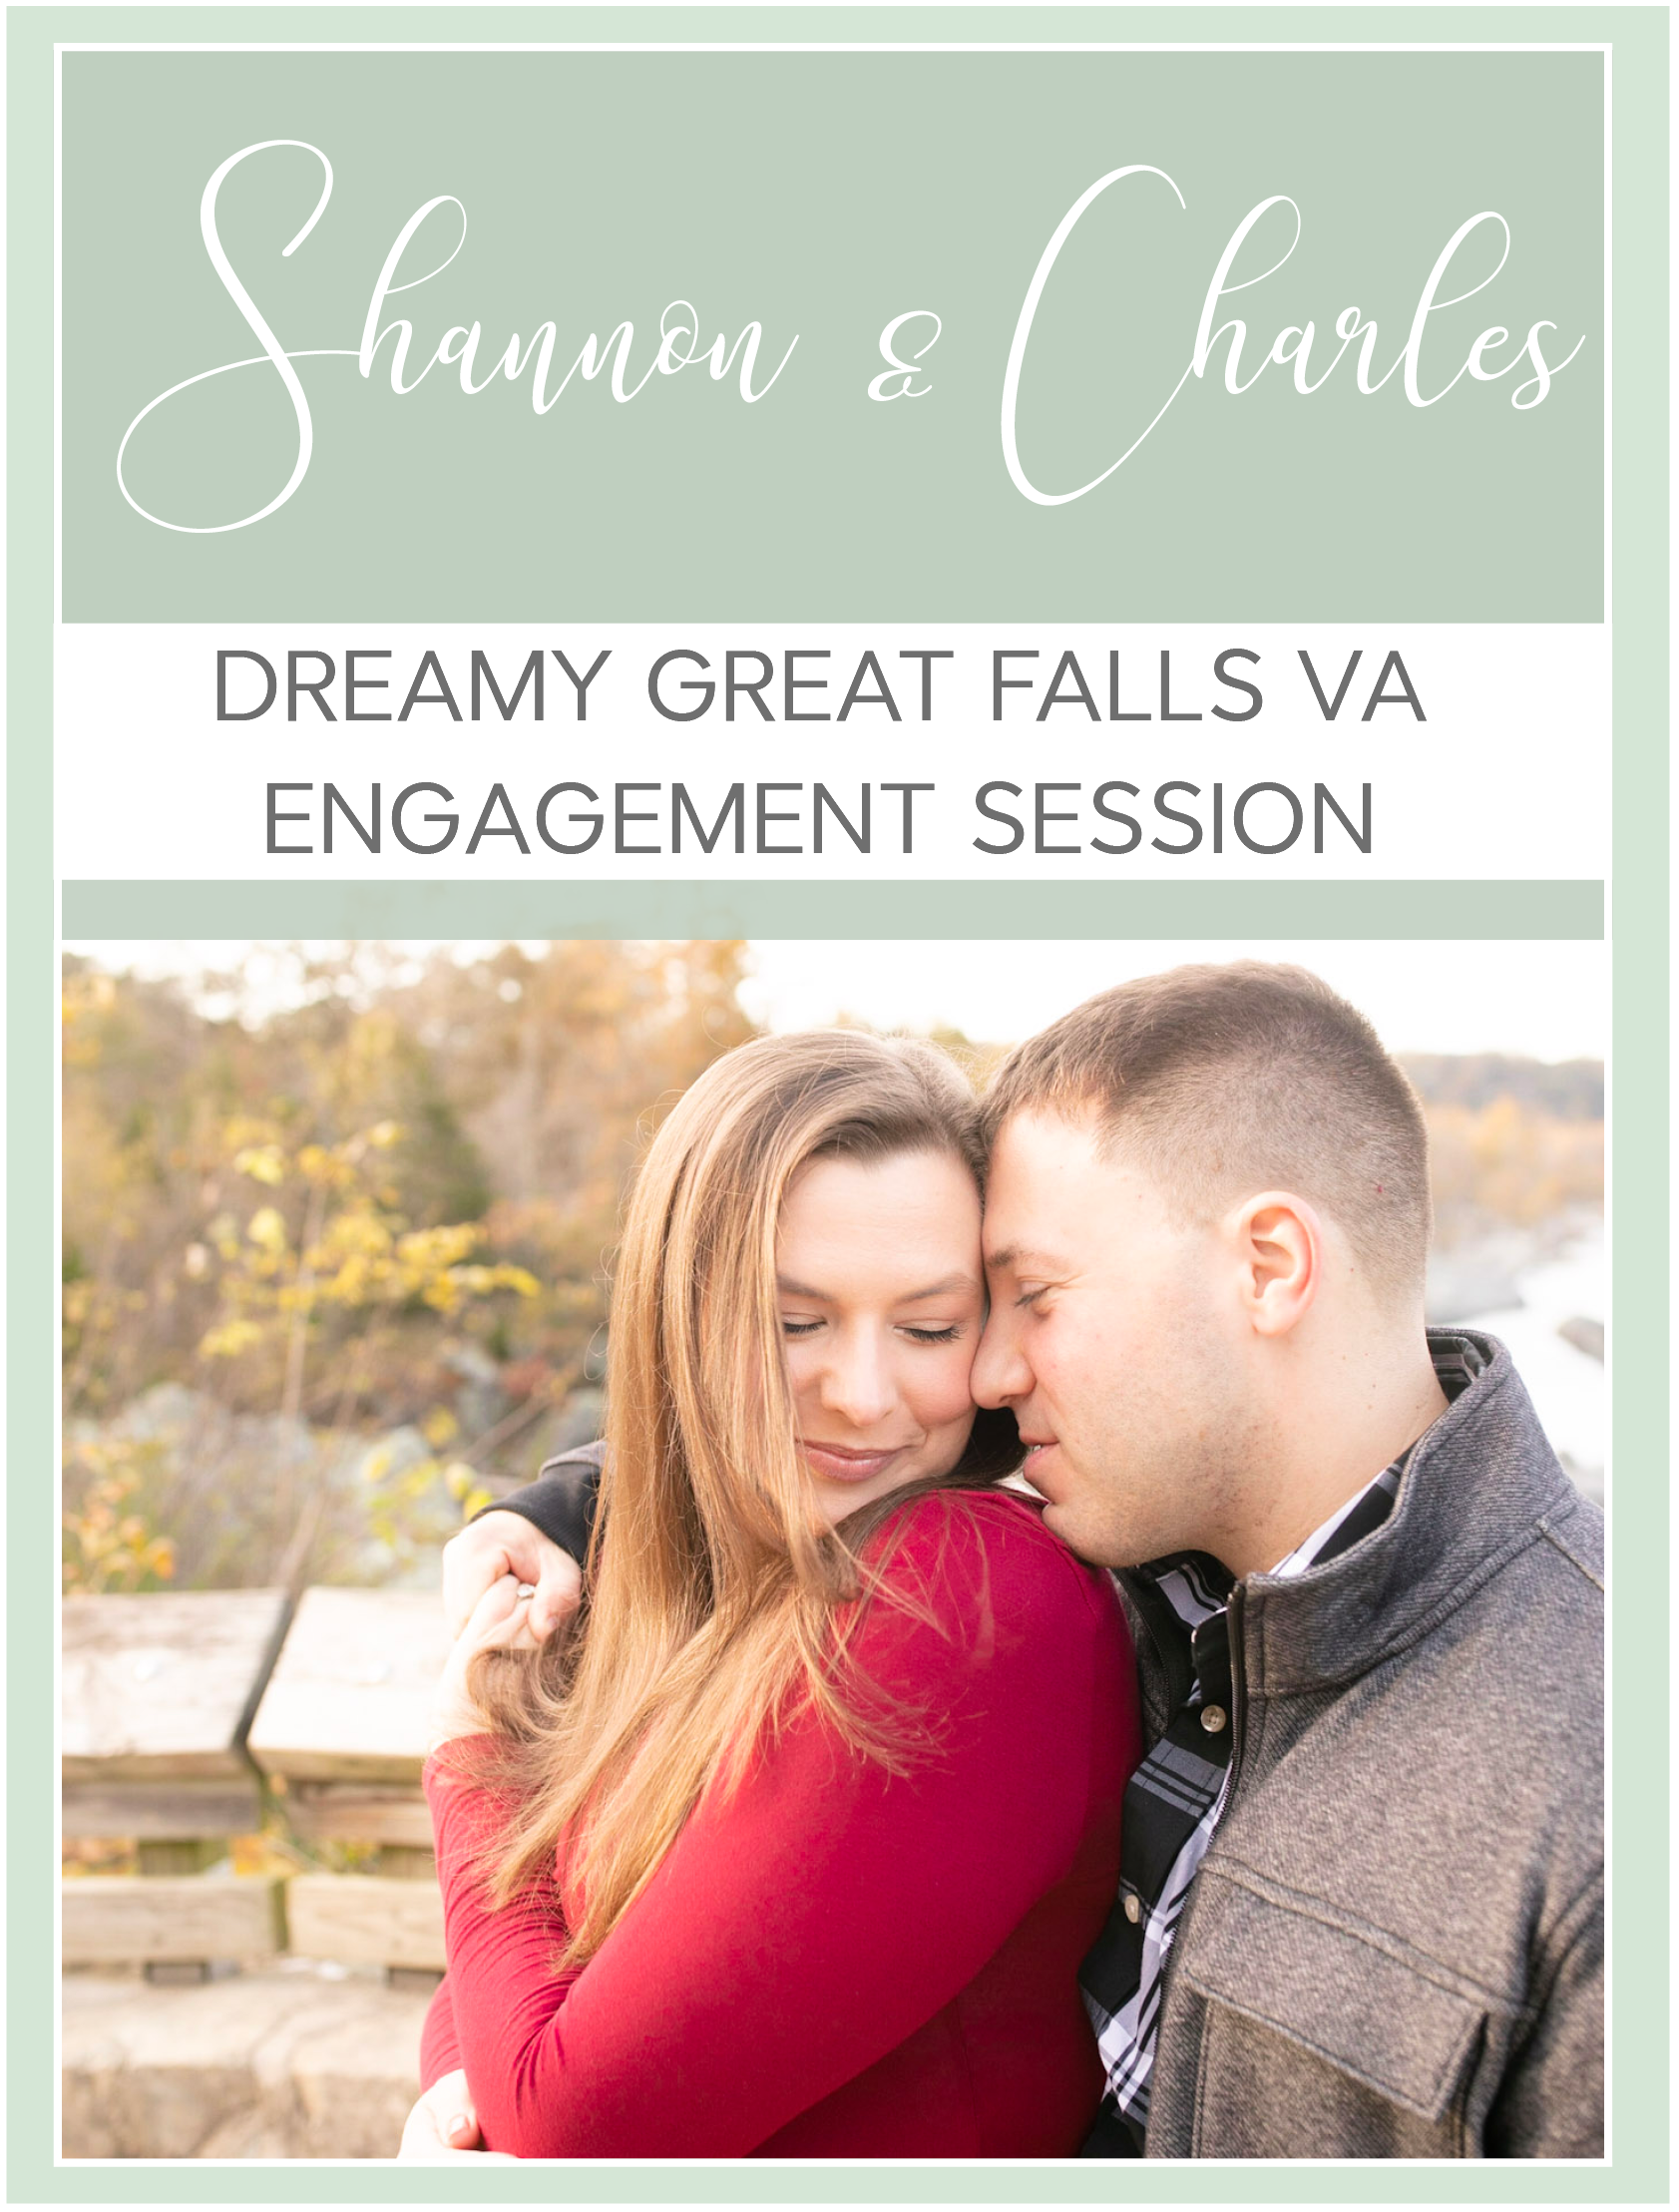 Dreamy great falls engagement sesionnnon and charles